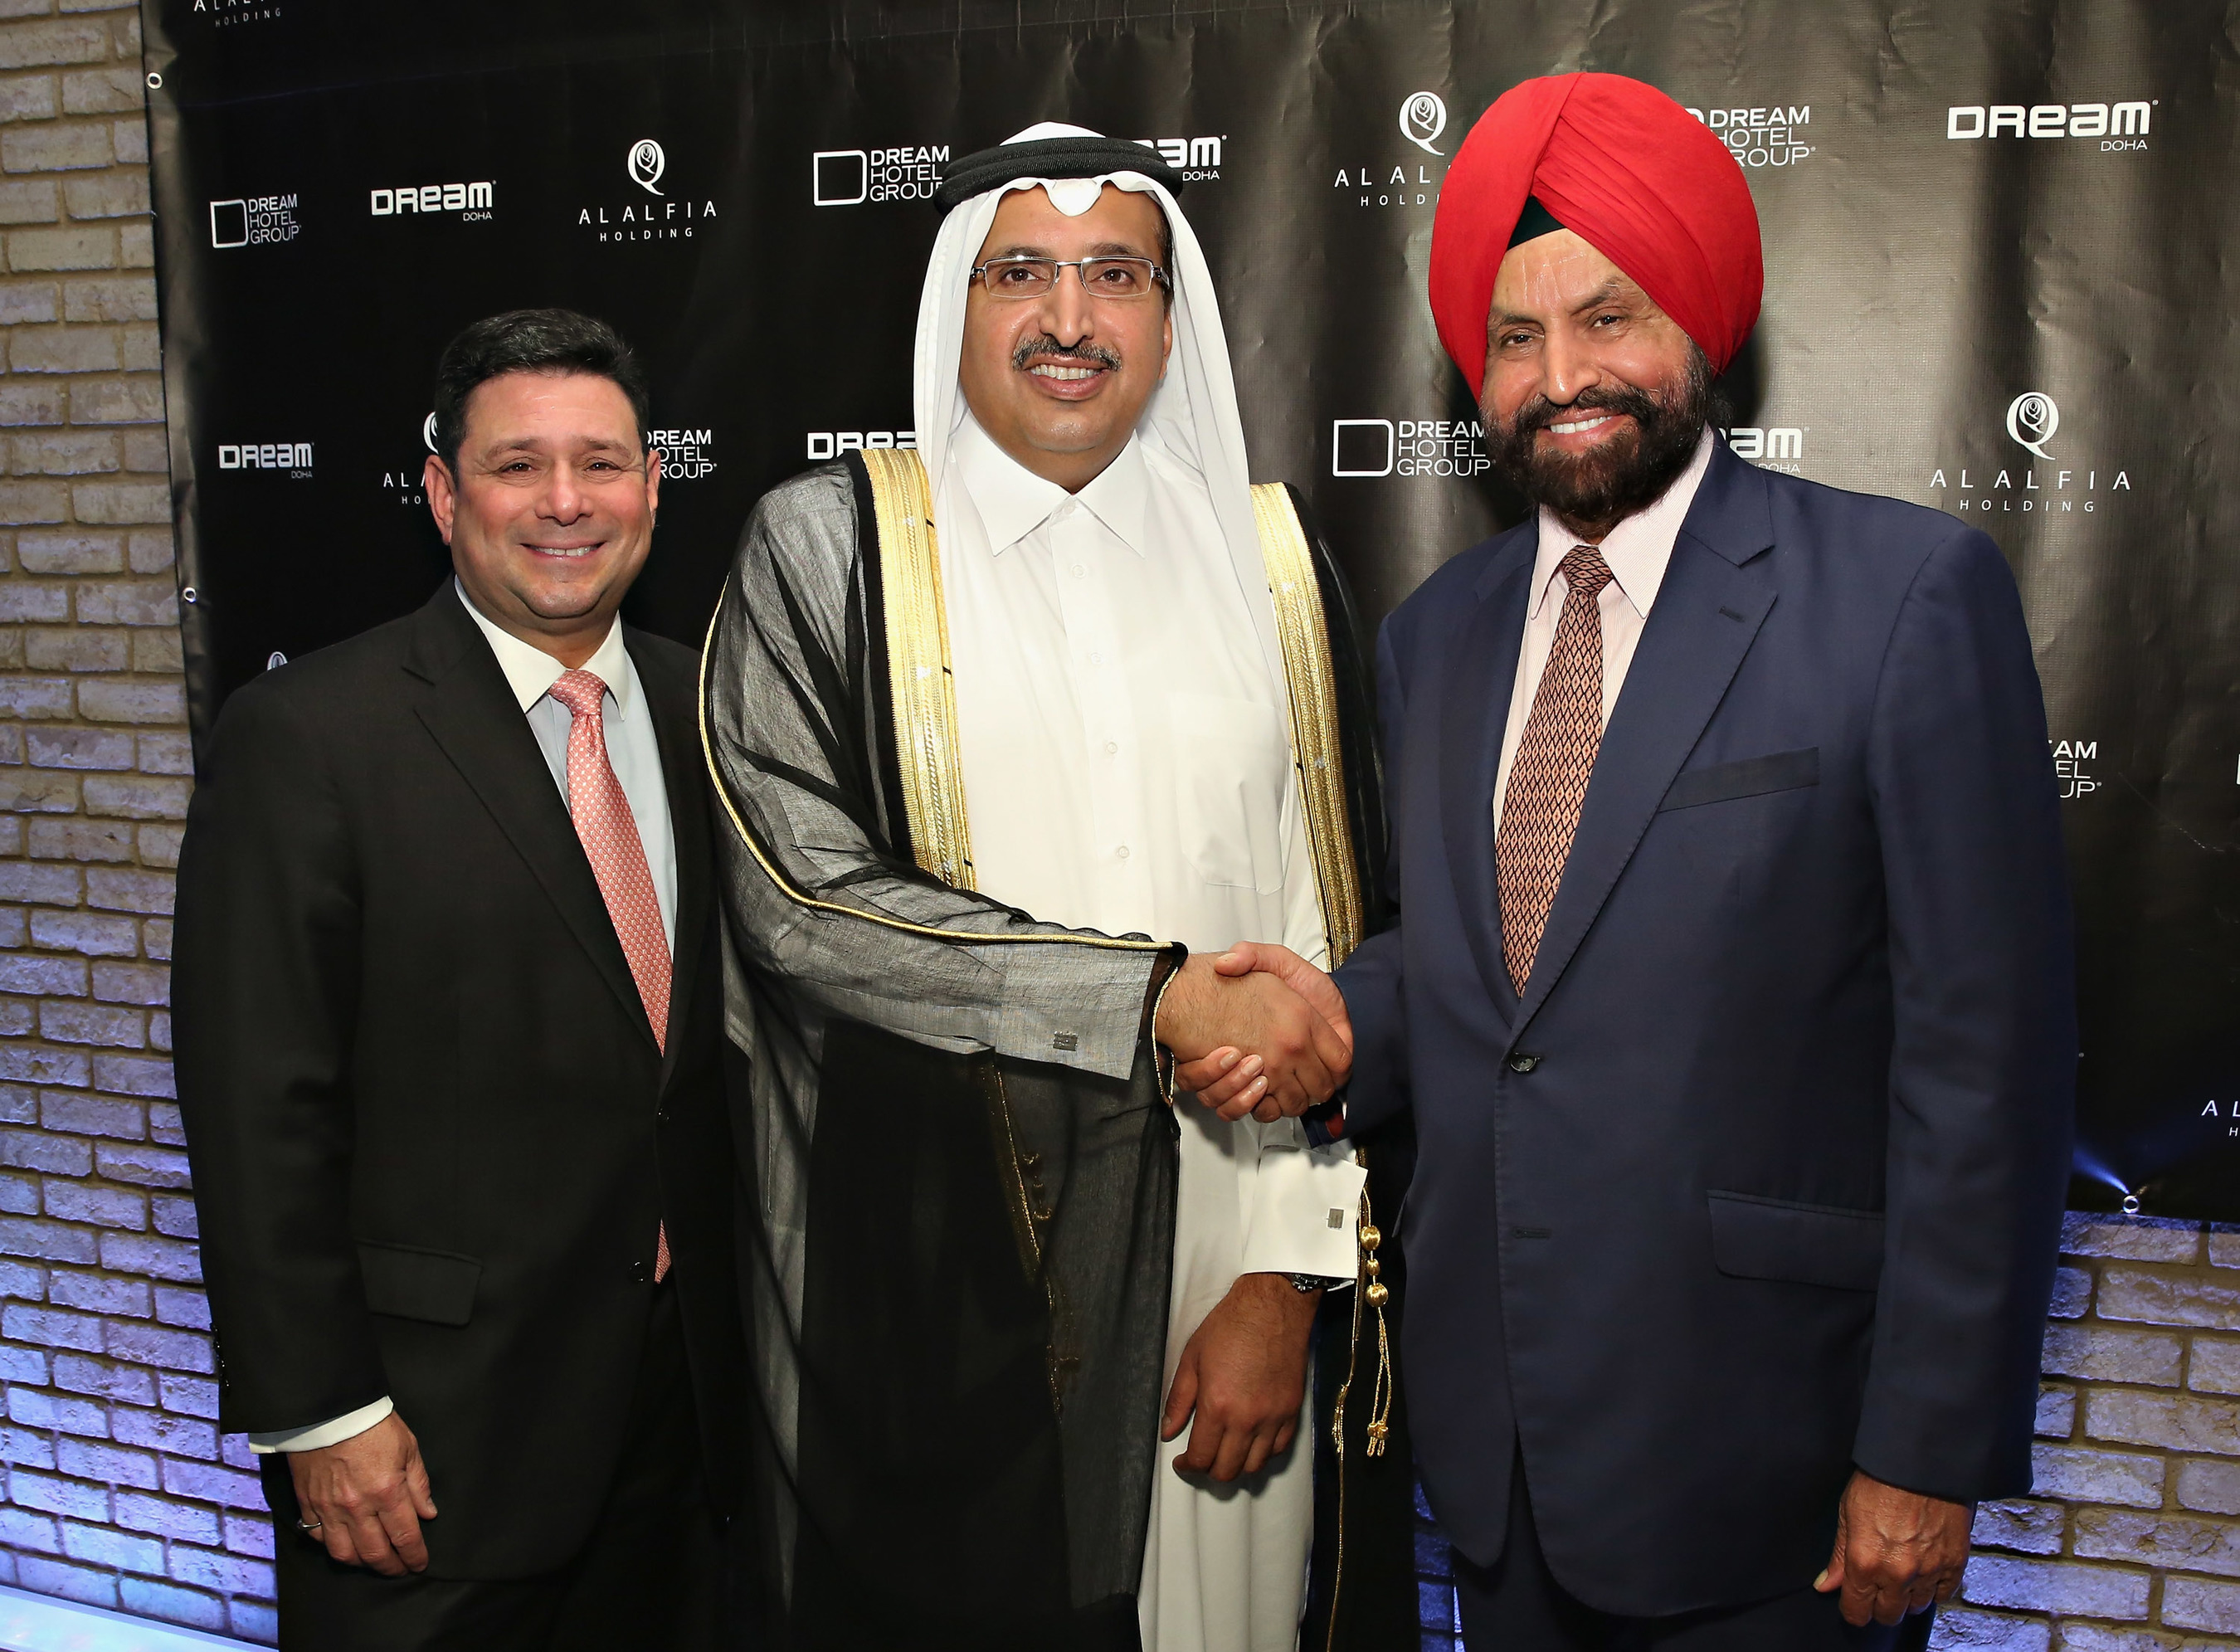 Dream Doha signing ceremony at Dream Downtown New York, L-R: Jay Stein, CEO, Dream Hotel Group; Sheikh Sultan, Al Alfia Holding; Sant Singh Chatwal, Chairman, Dream Hotel Group.